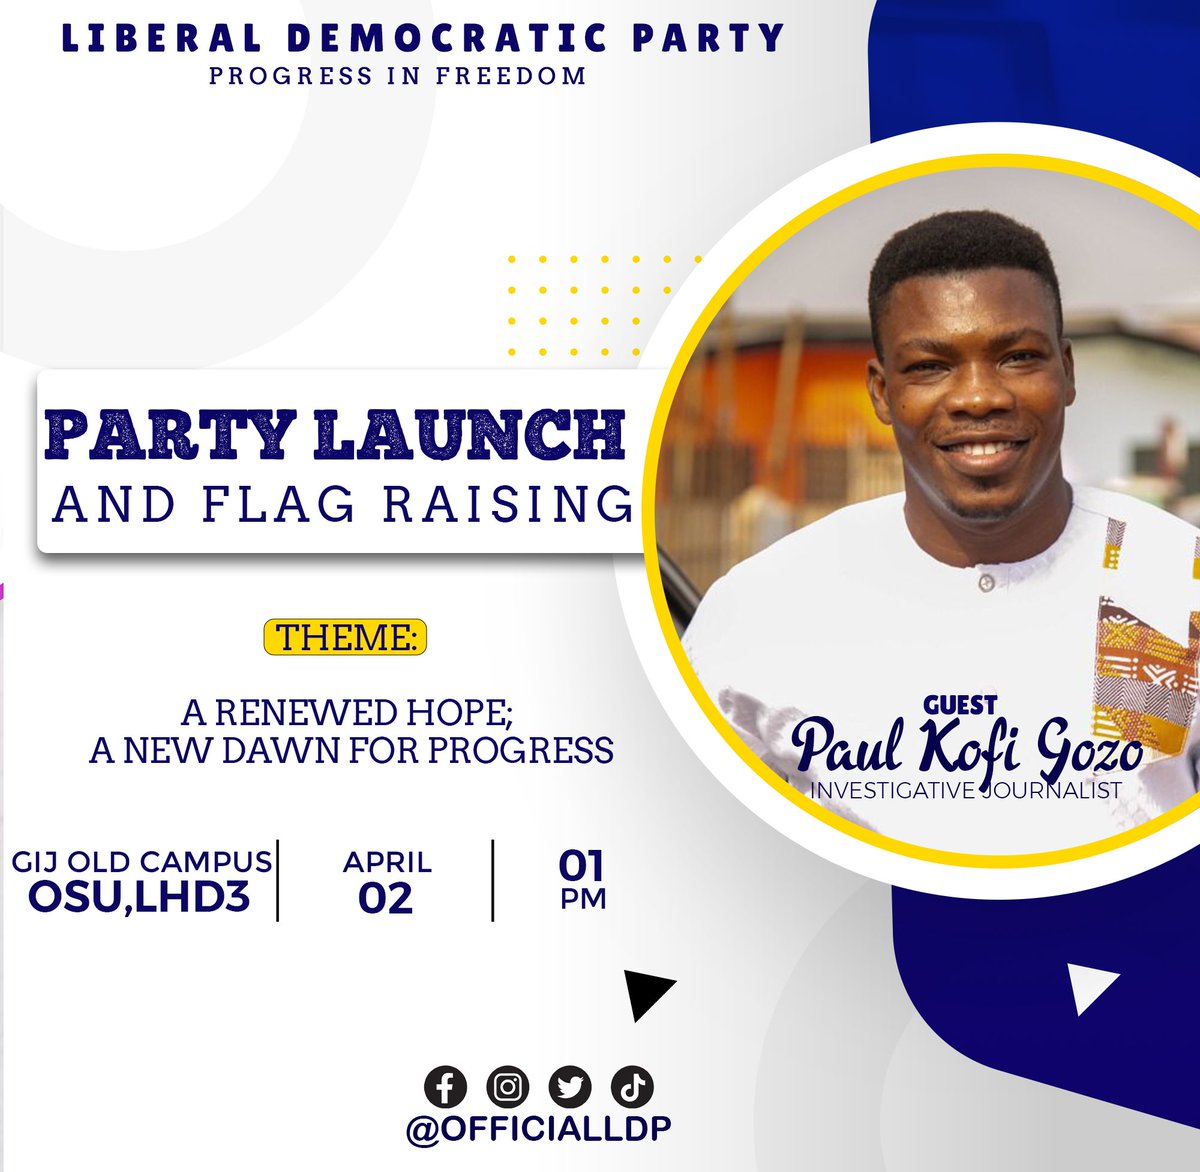 Solid guests, solid team, unstoppable party.
Paul Kofi Gozo in our guest list for our party launch. All roads lead to LHD3 of GIJ's Osu campus at exactly 1:00pm. Remember, we're #progressinfreedom and we are #theliberals.
#3HYE🔥
@TDzineku @kodwoboateng @KodwoBoateng1